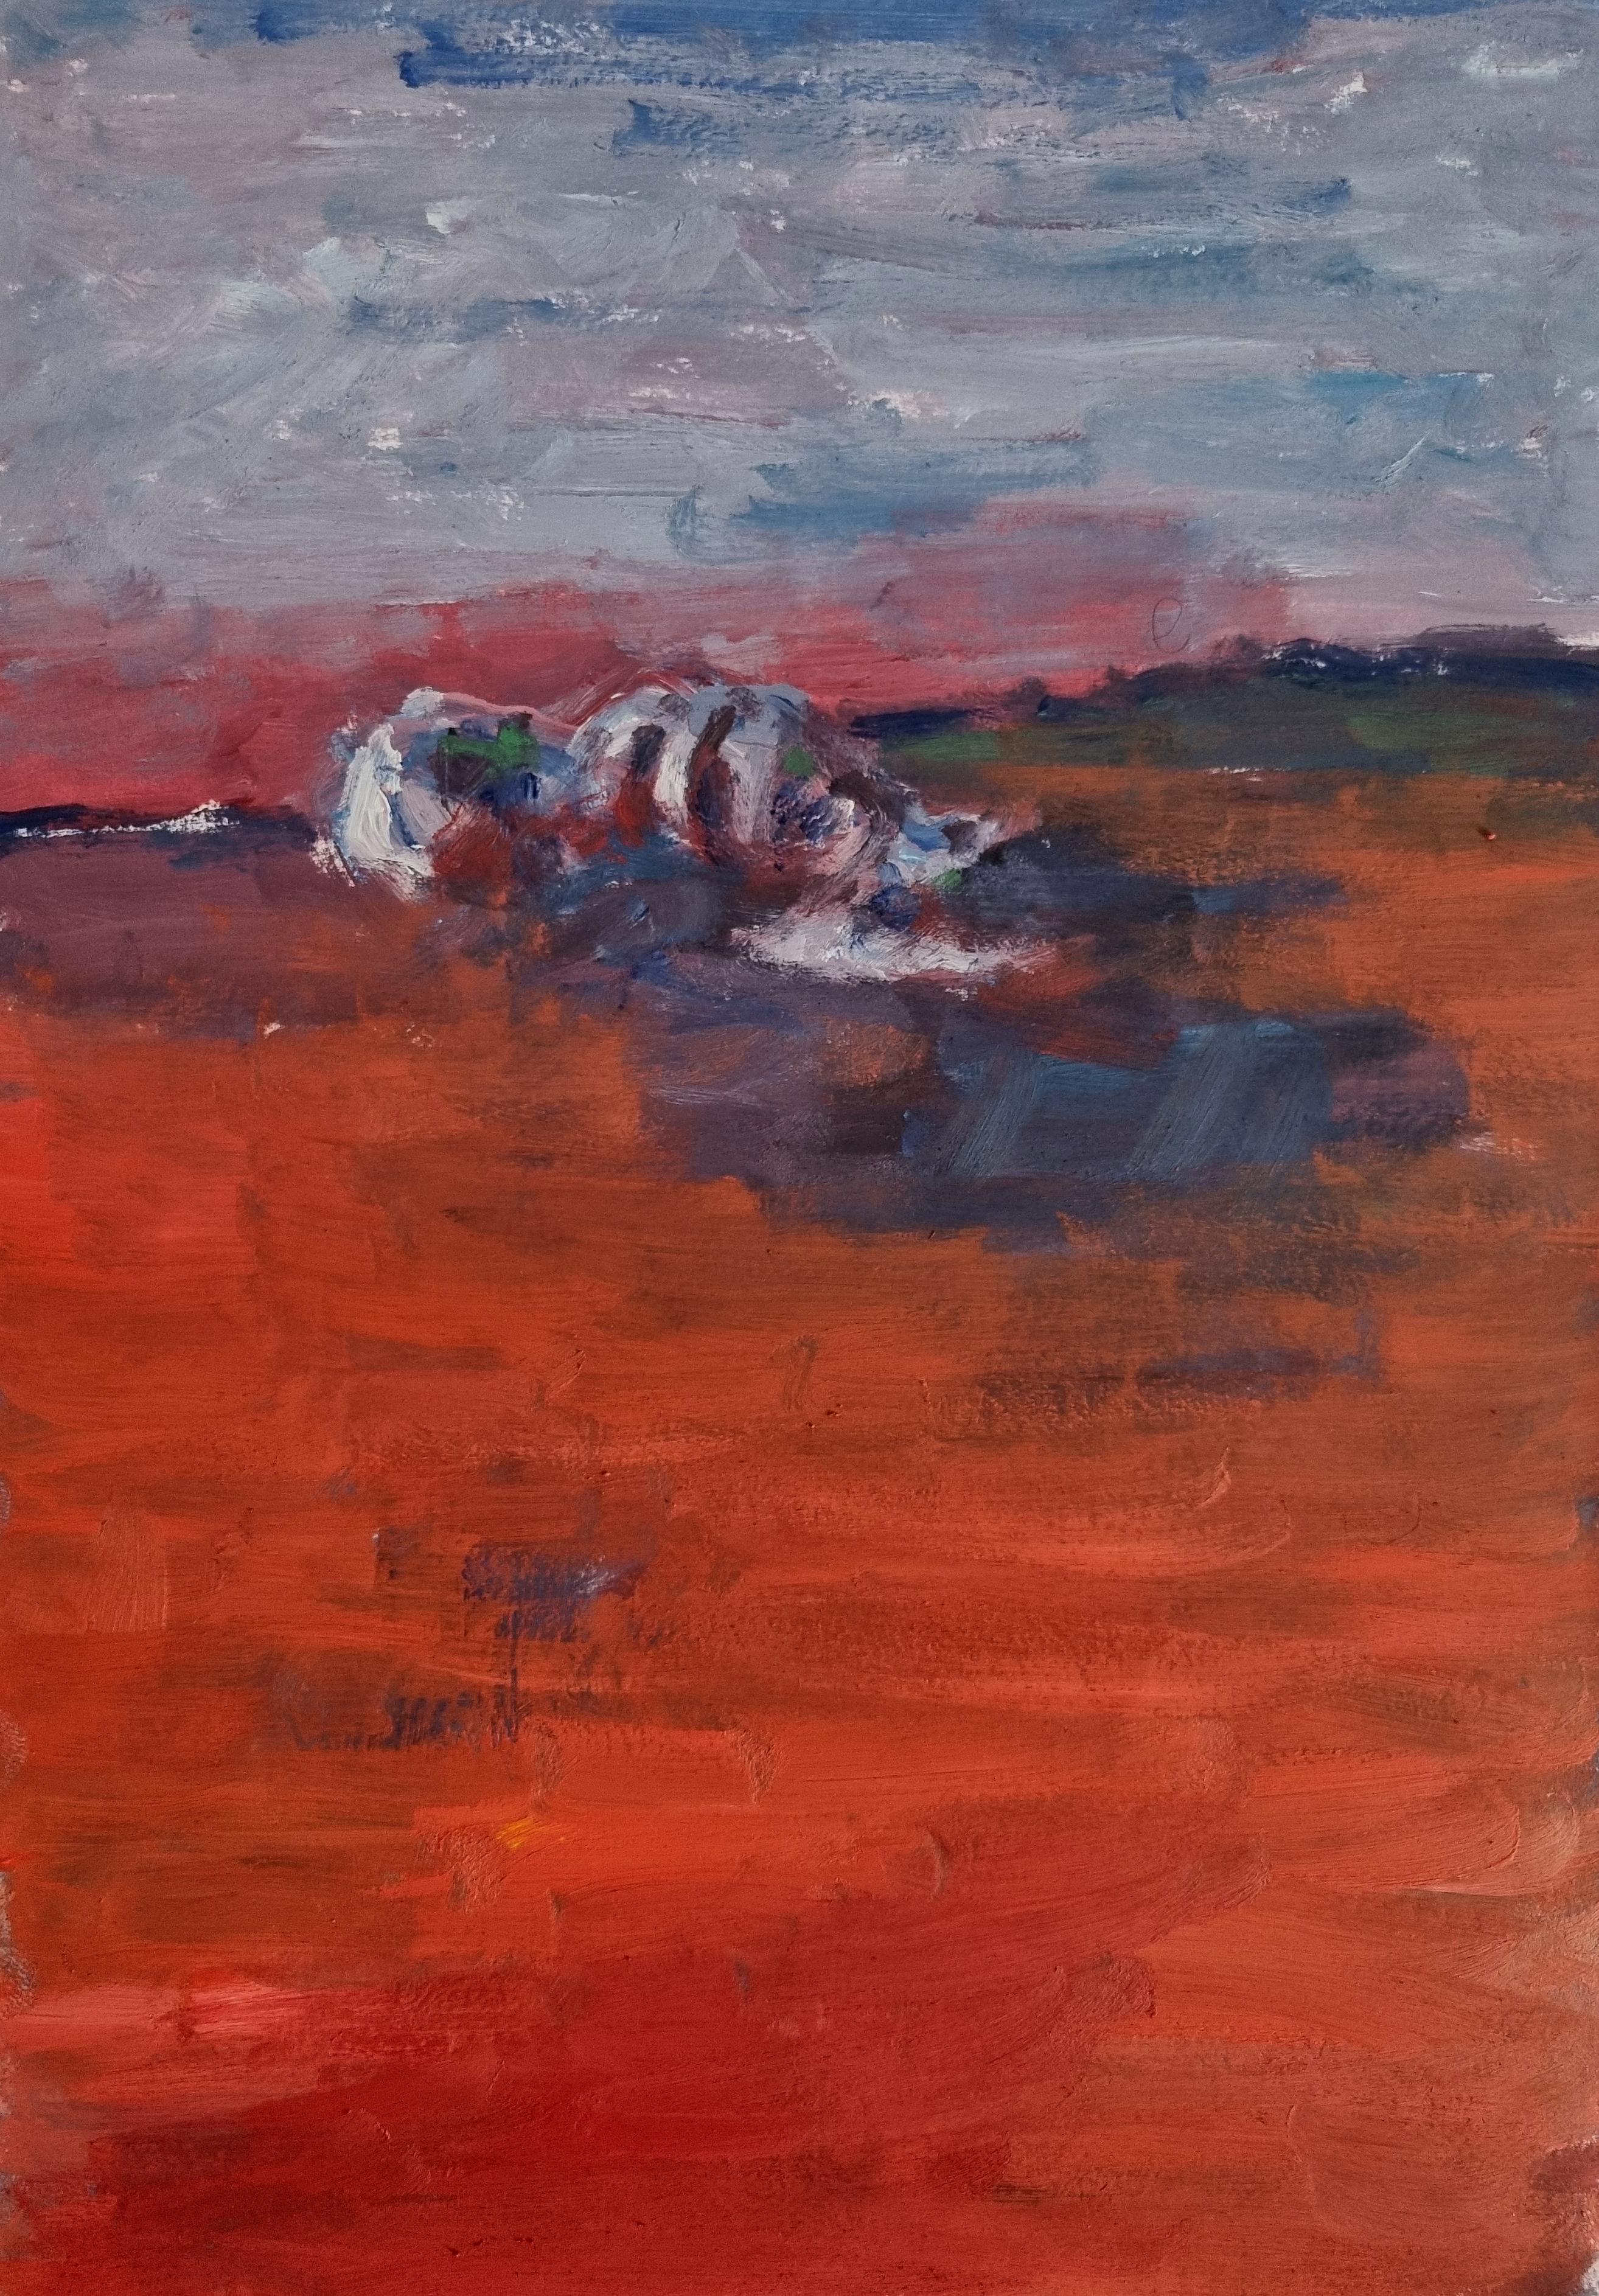 Zsolt Berszán Landscape Art - Remains (Body in the Field 1) - 21st Century, Work On Paper, Red, Contemporary